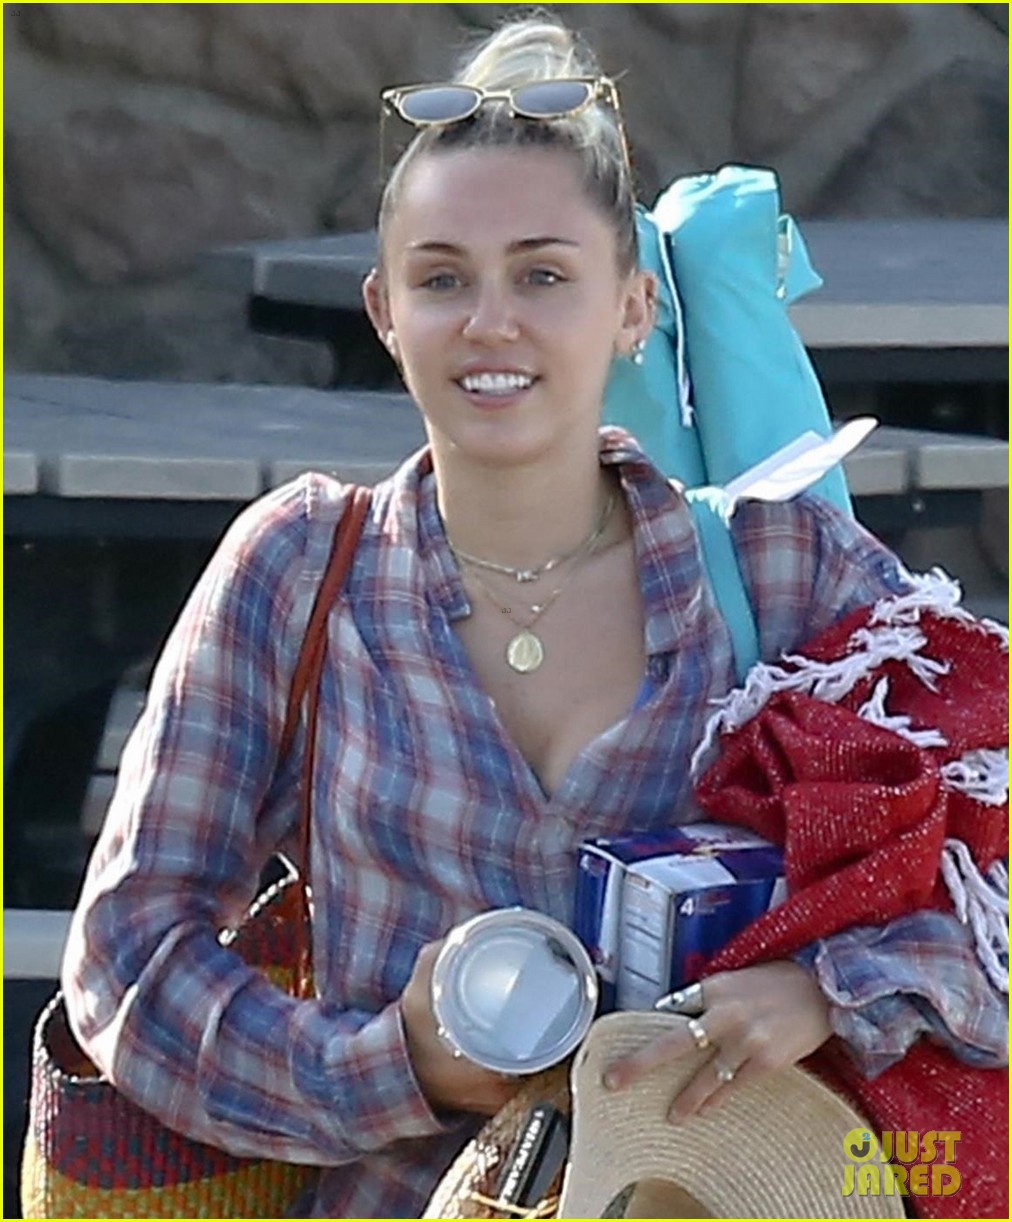 miley cyrus joins her parents for grocery shopping in malibu 02